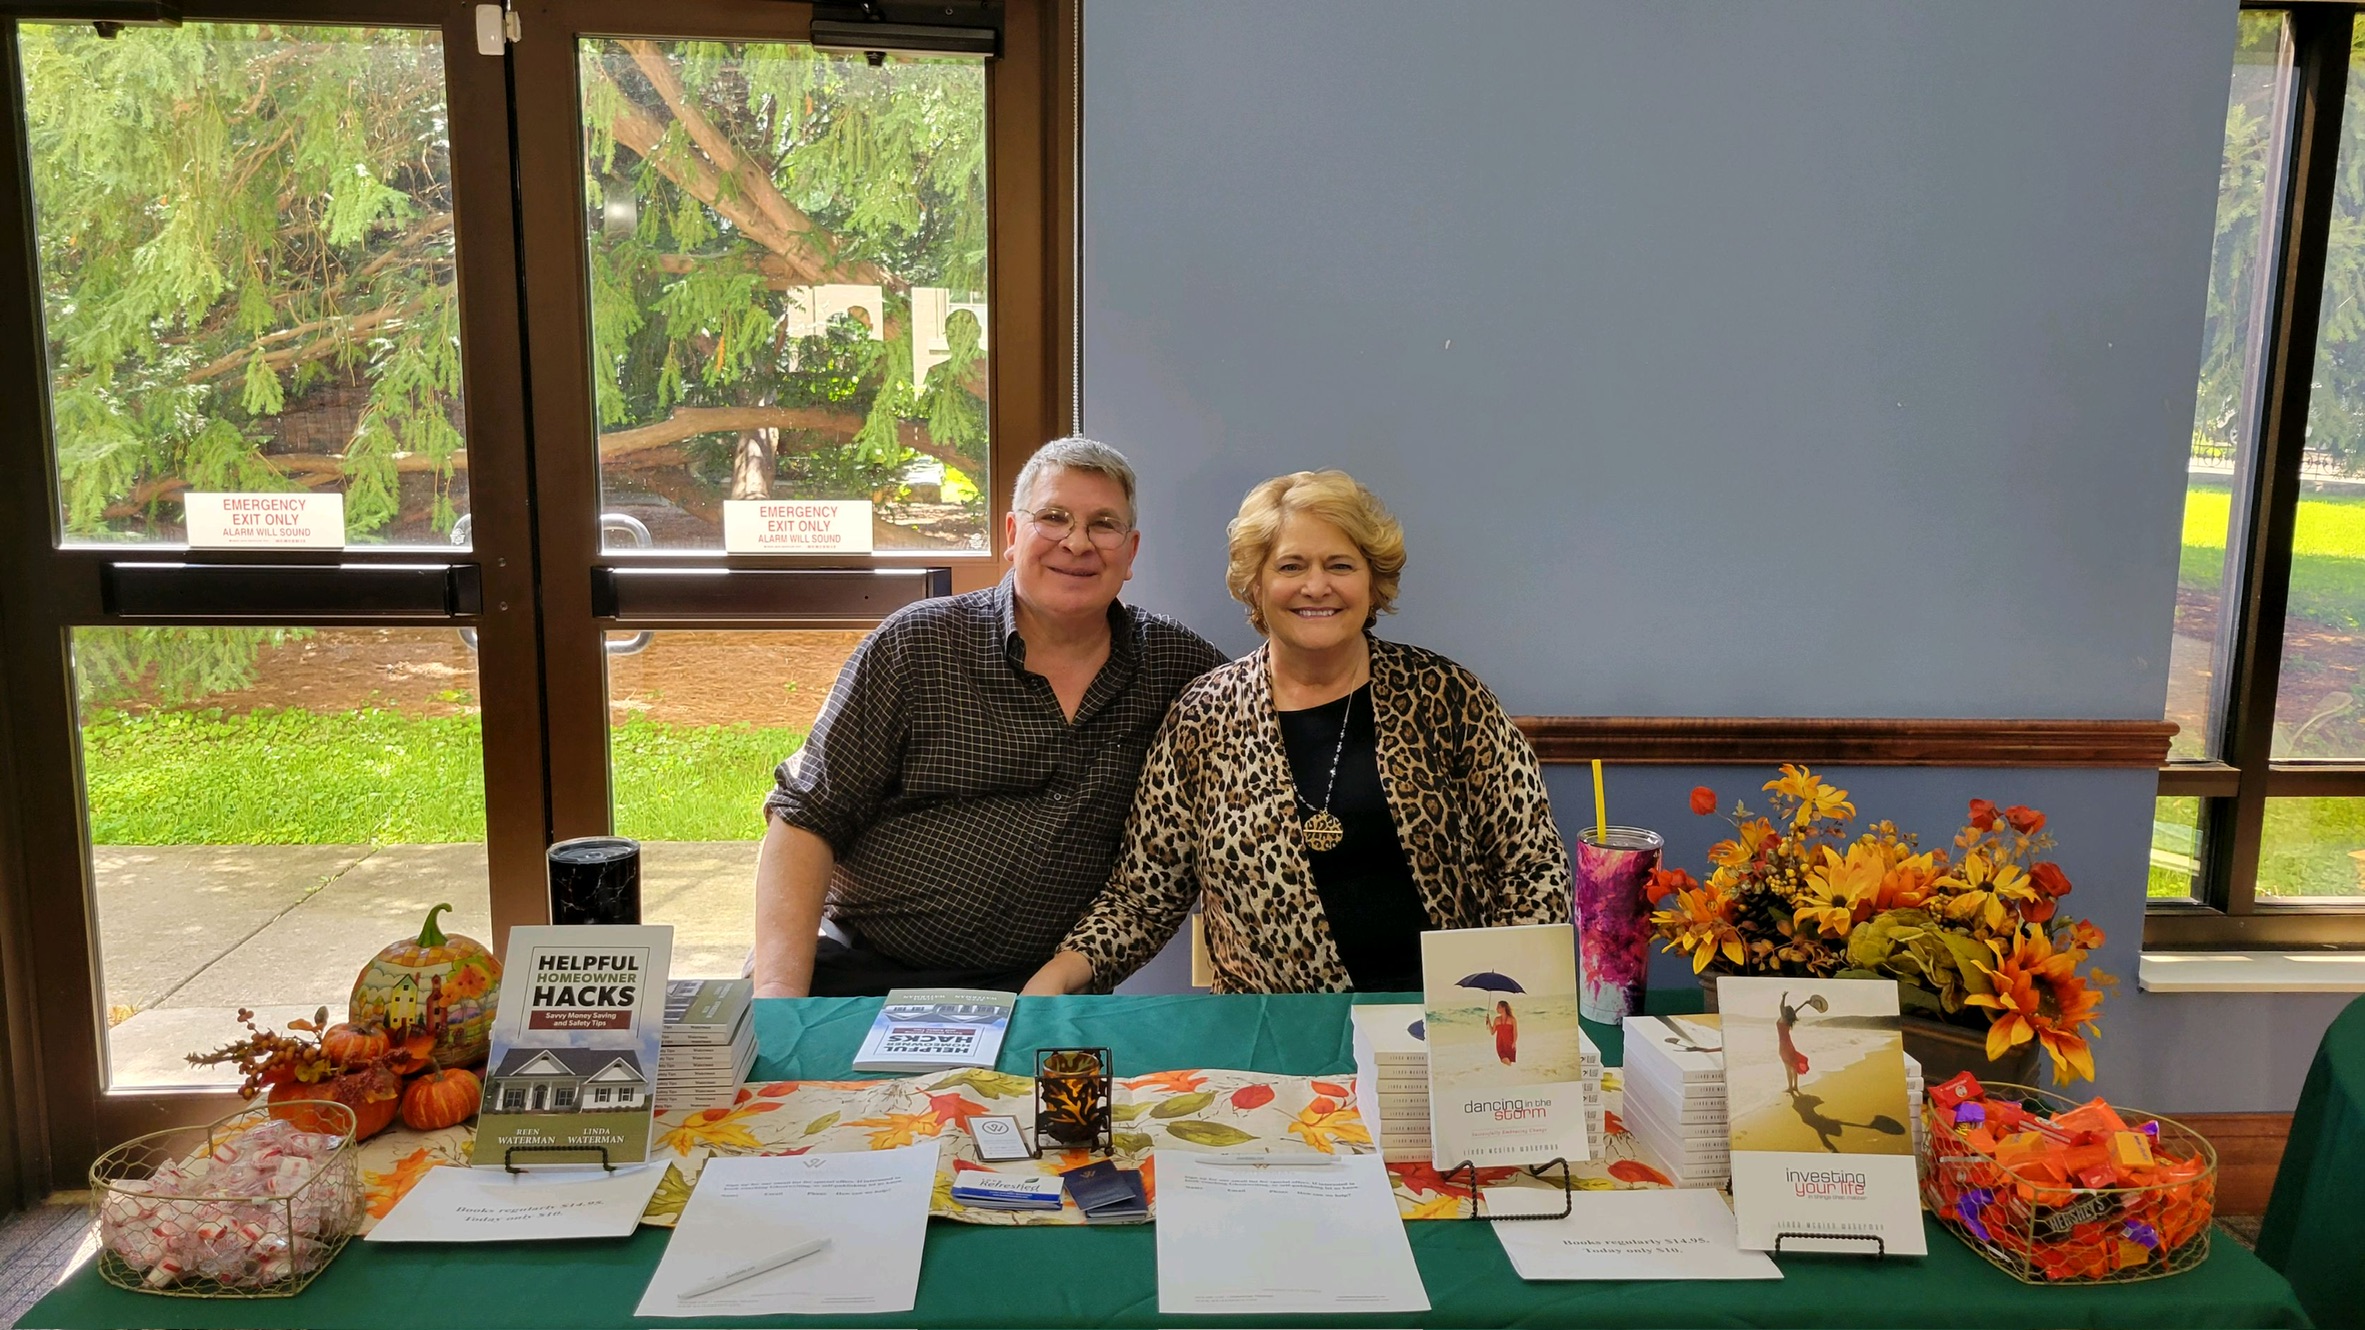 Linda & Reen Waterman at an author event in Chattanooga, Tennessee